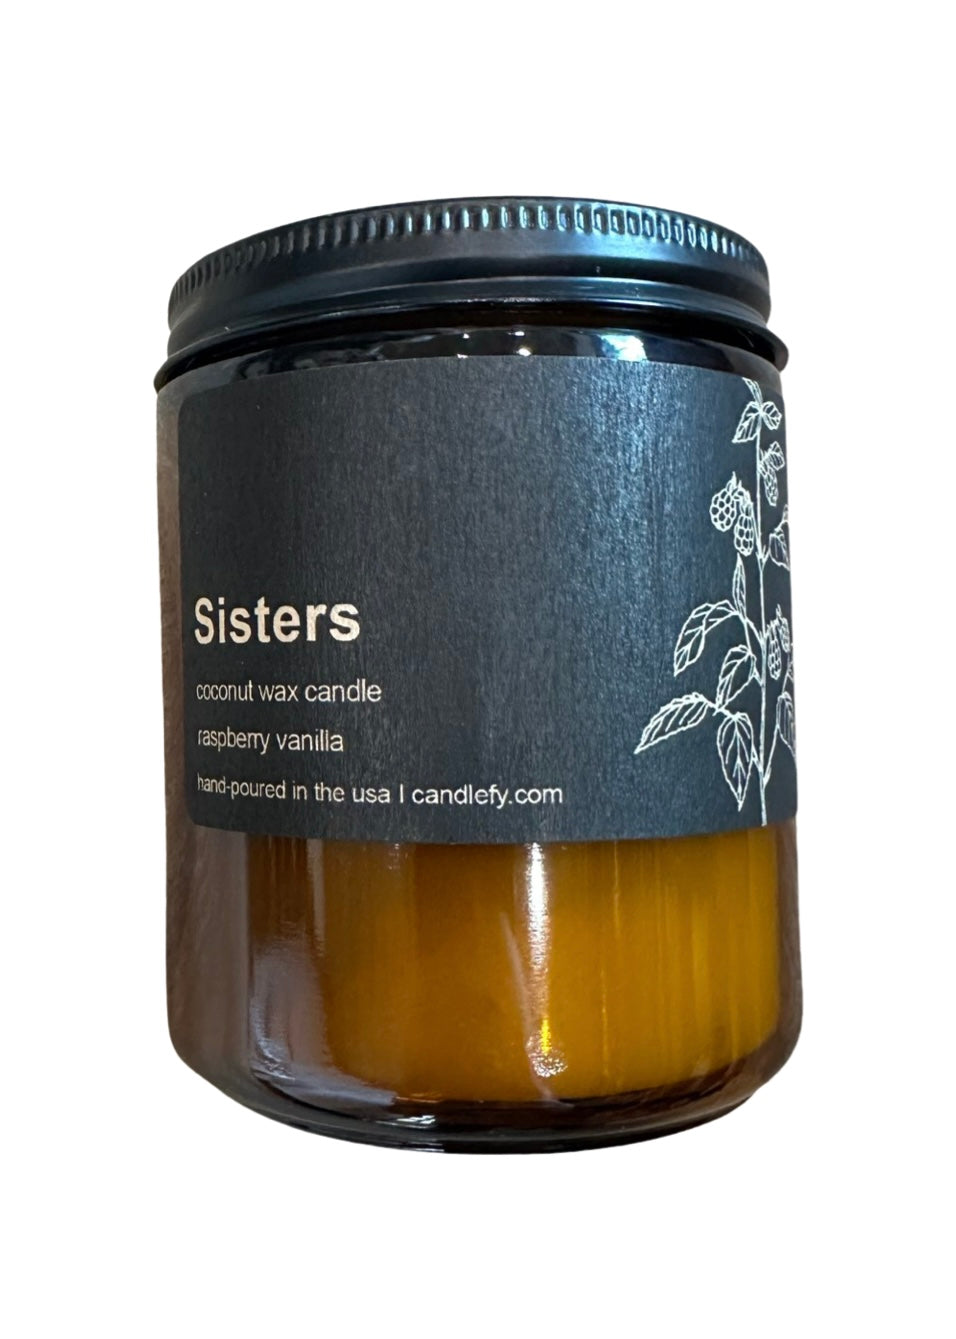 "Sisters" Wax Candle